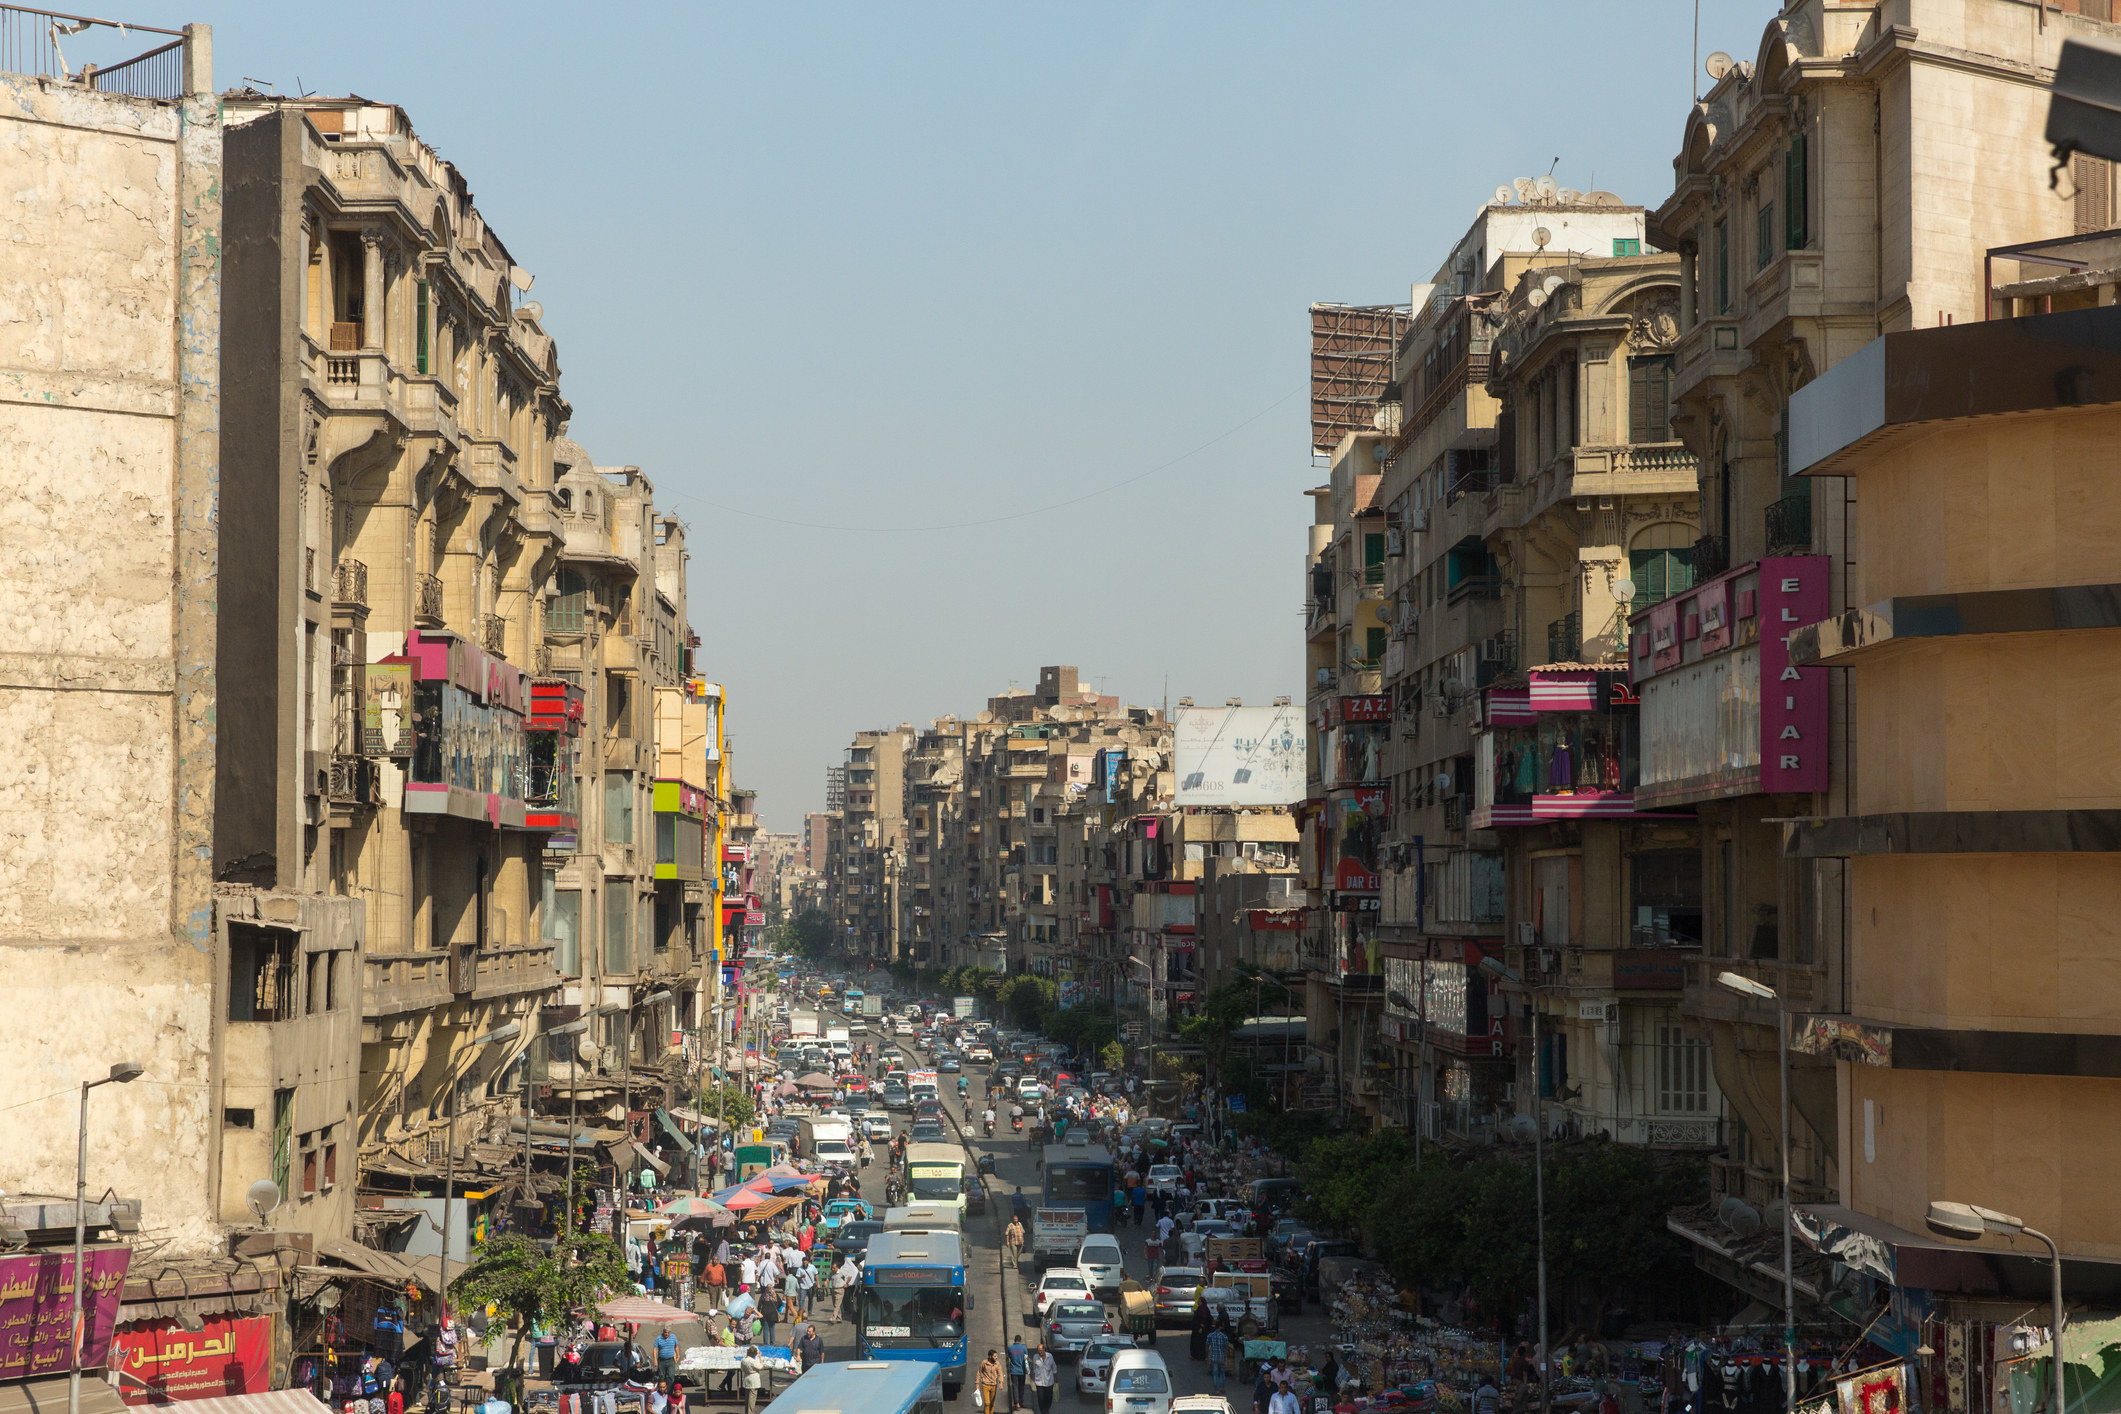 A busy street in downtown Cairo